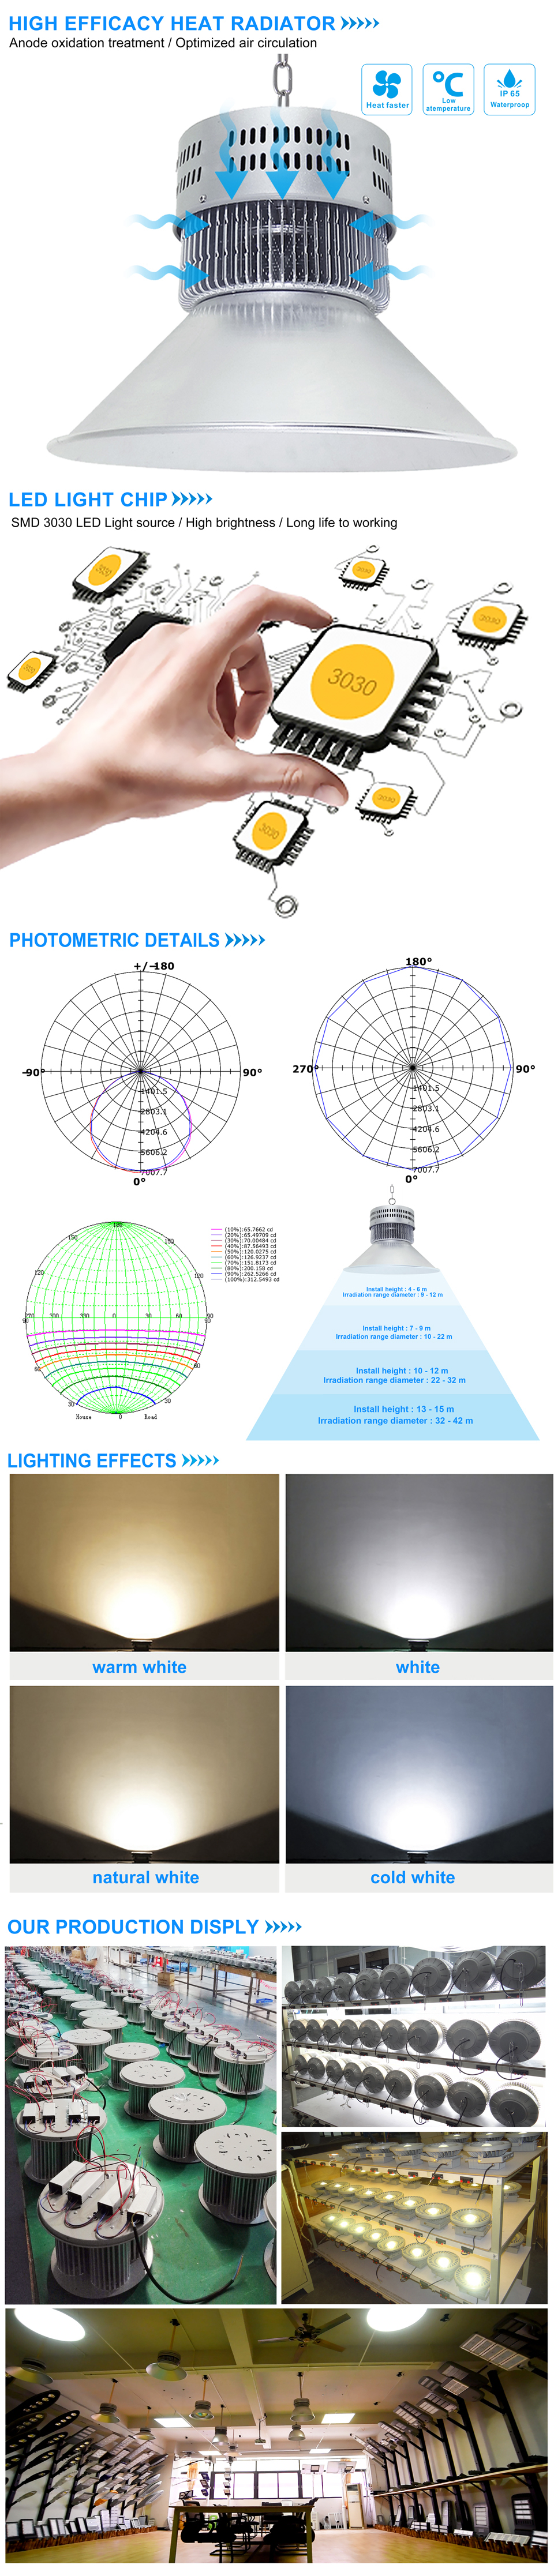 Energy Class A+ Indee 200W Dimming LED High Bay Lighting Nature White LED High Bay Lights 4000K Super Bright Commercial Lighting,23500lm Beam Angle 40 degrees Industrial Lighting Waterproof 